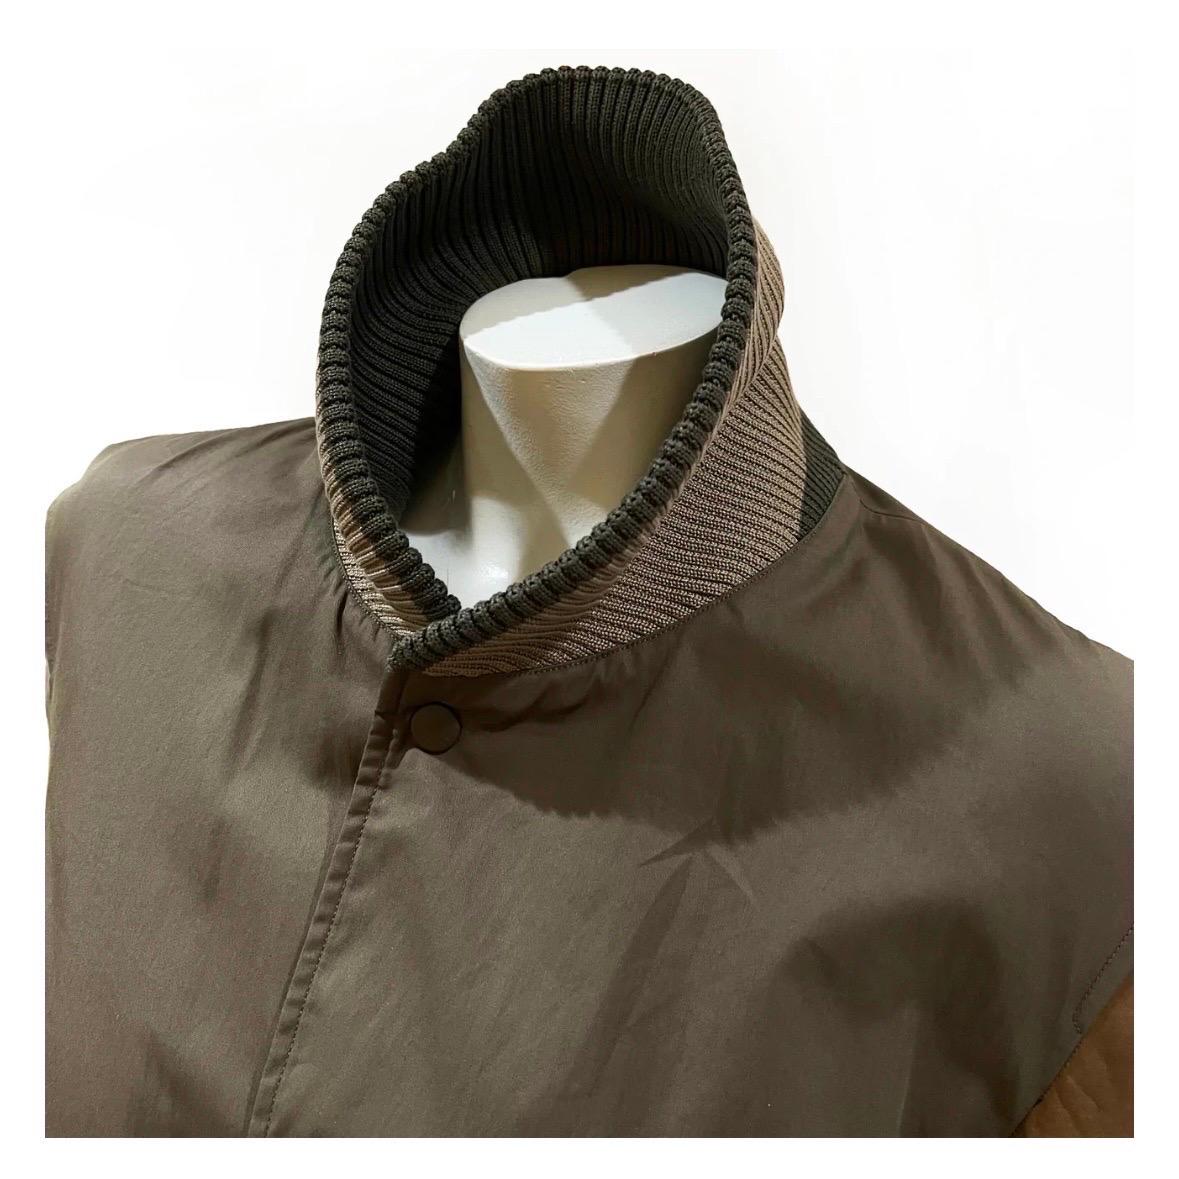 Leather Sleeve Bomber Jacket by Gucci
Fall 2010 Menswear Collection
Made in Italy
Olive green
Brown leather sleeves
Front snap button closure
Long sleeves
Ribbed striped cotton trim detail
Dual open side pockets
Interior pocket with zip closure